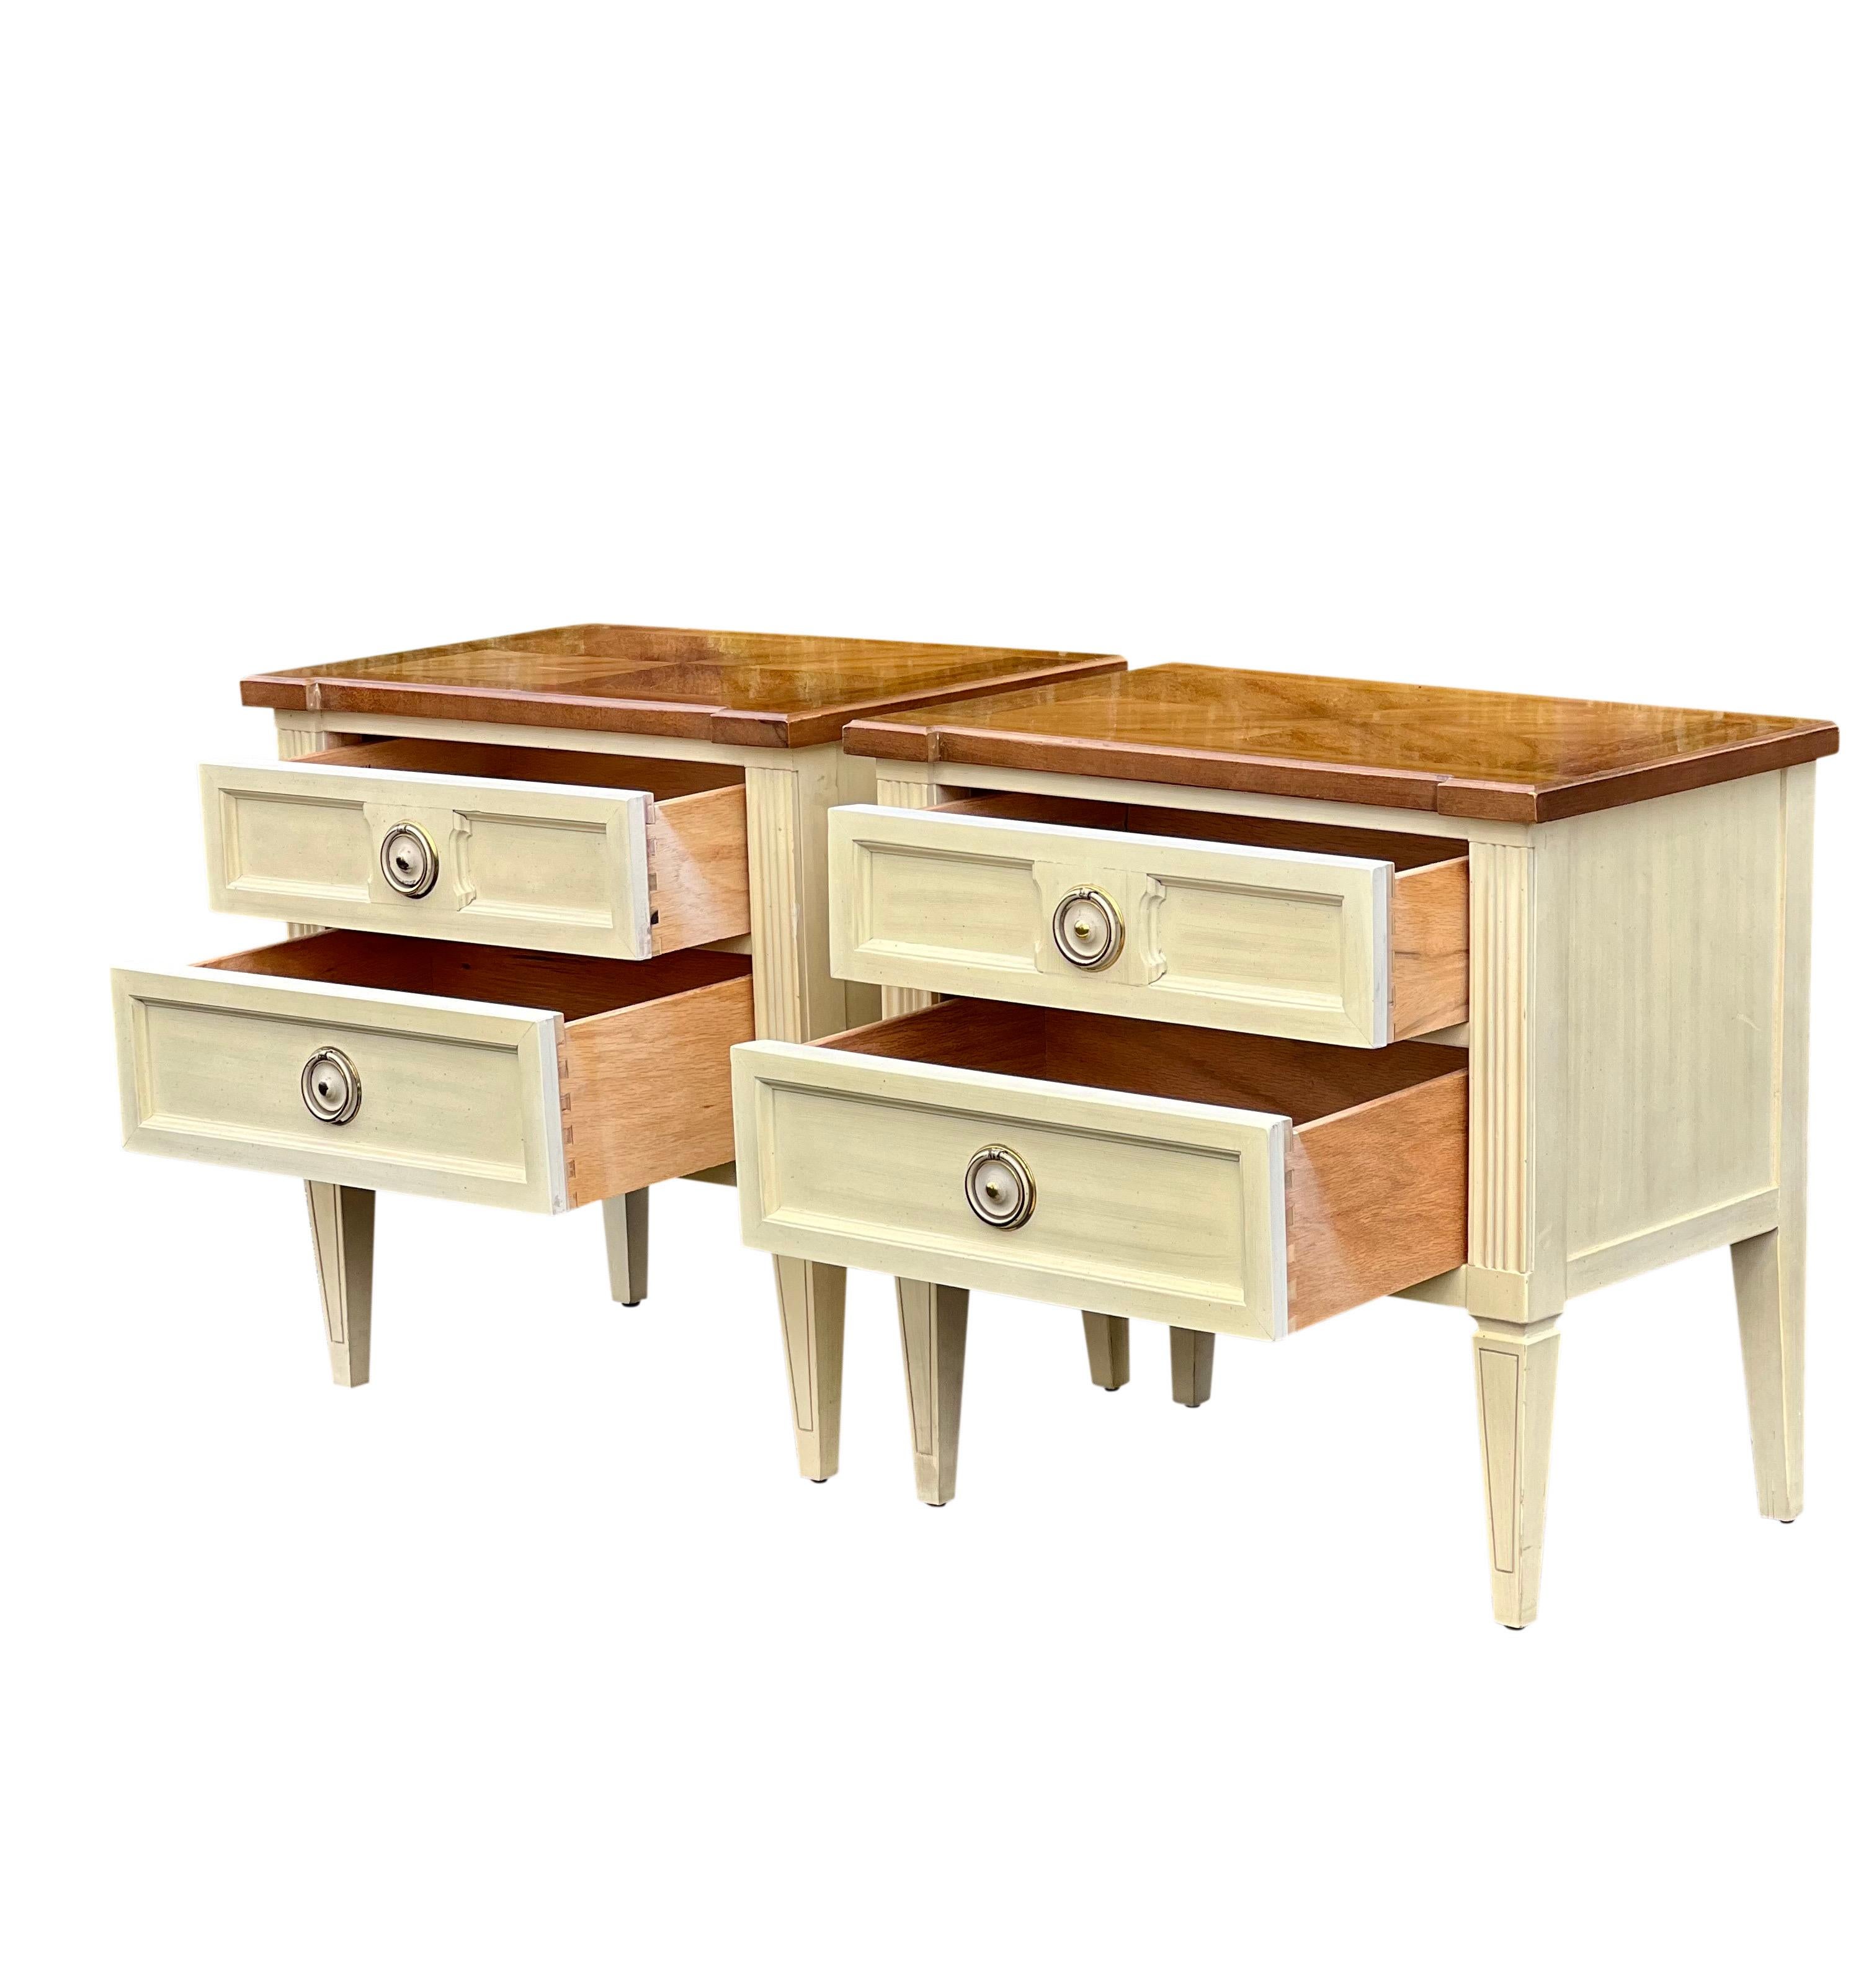 Neoclassical American of Martinsville Parquet Top White Nightstands, a Pair For Sale